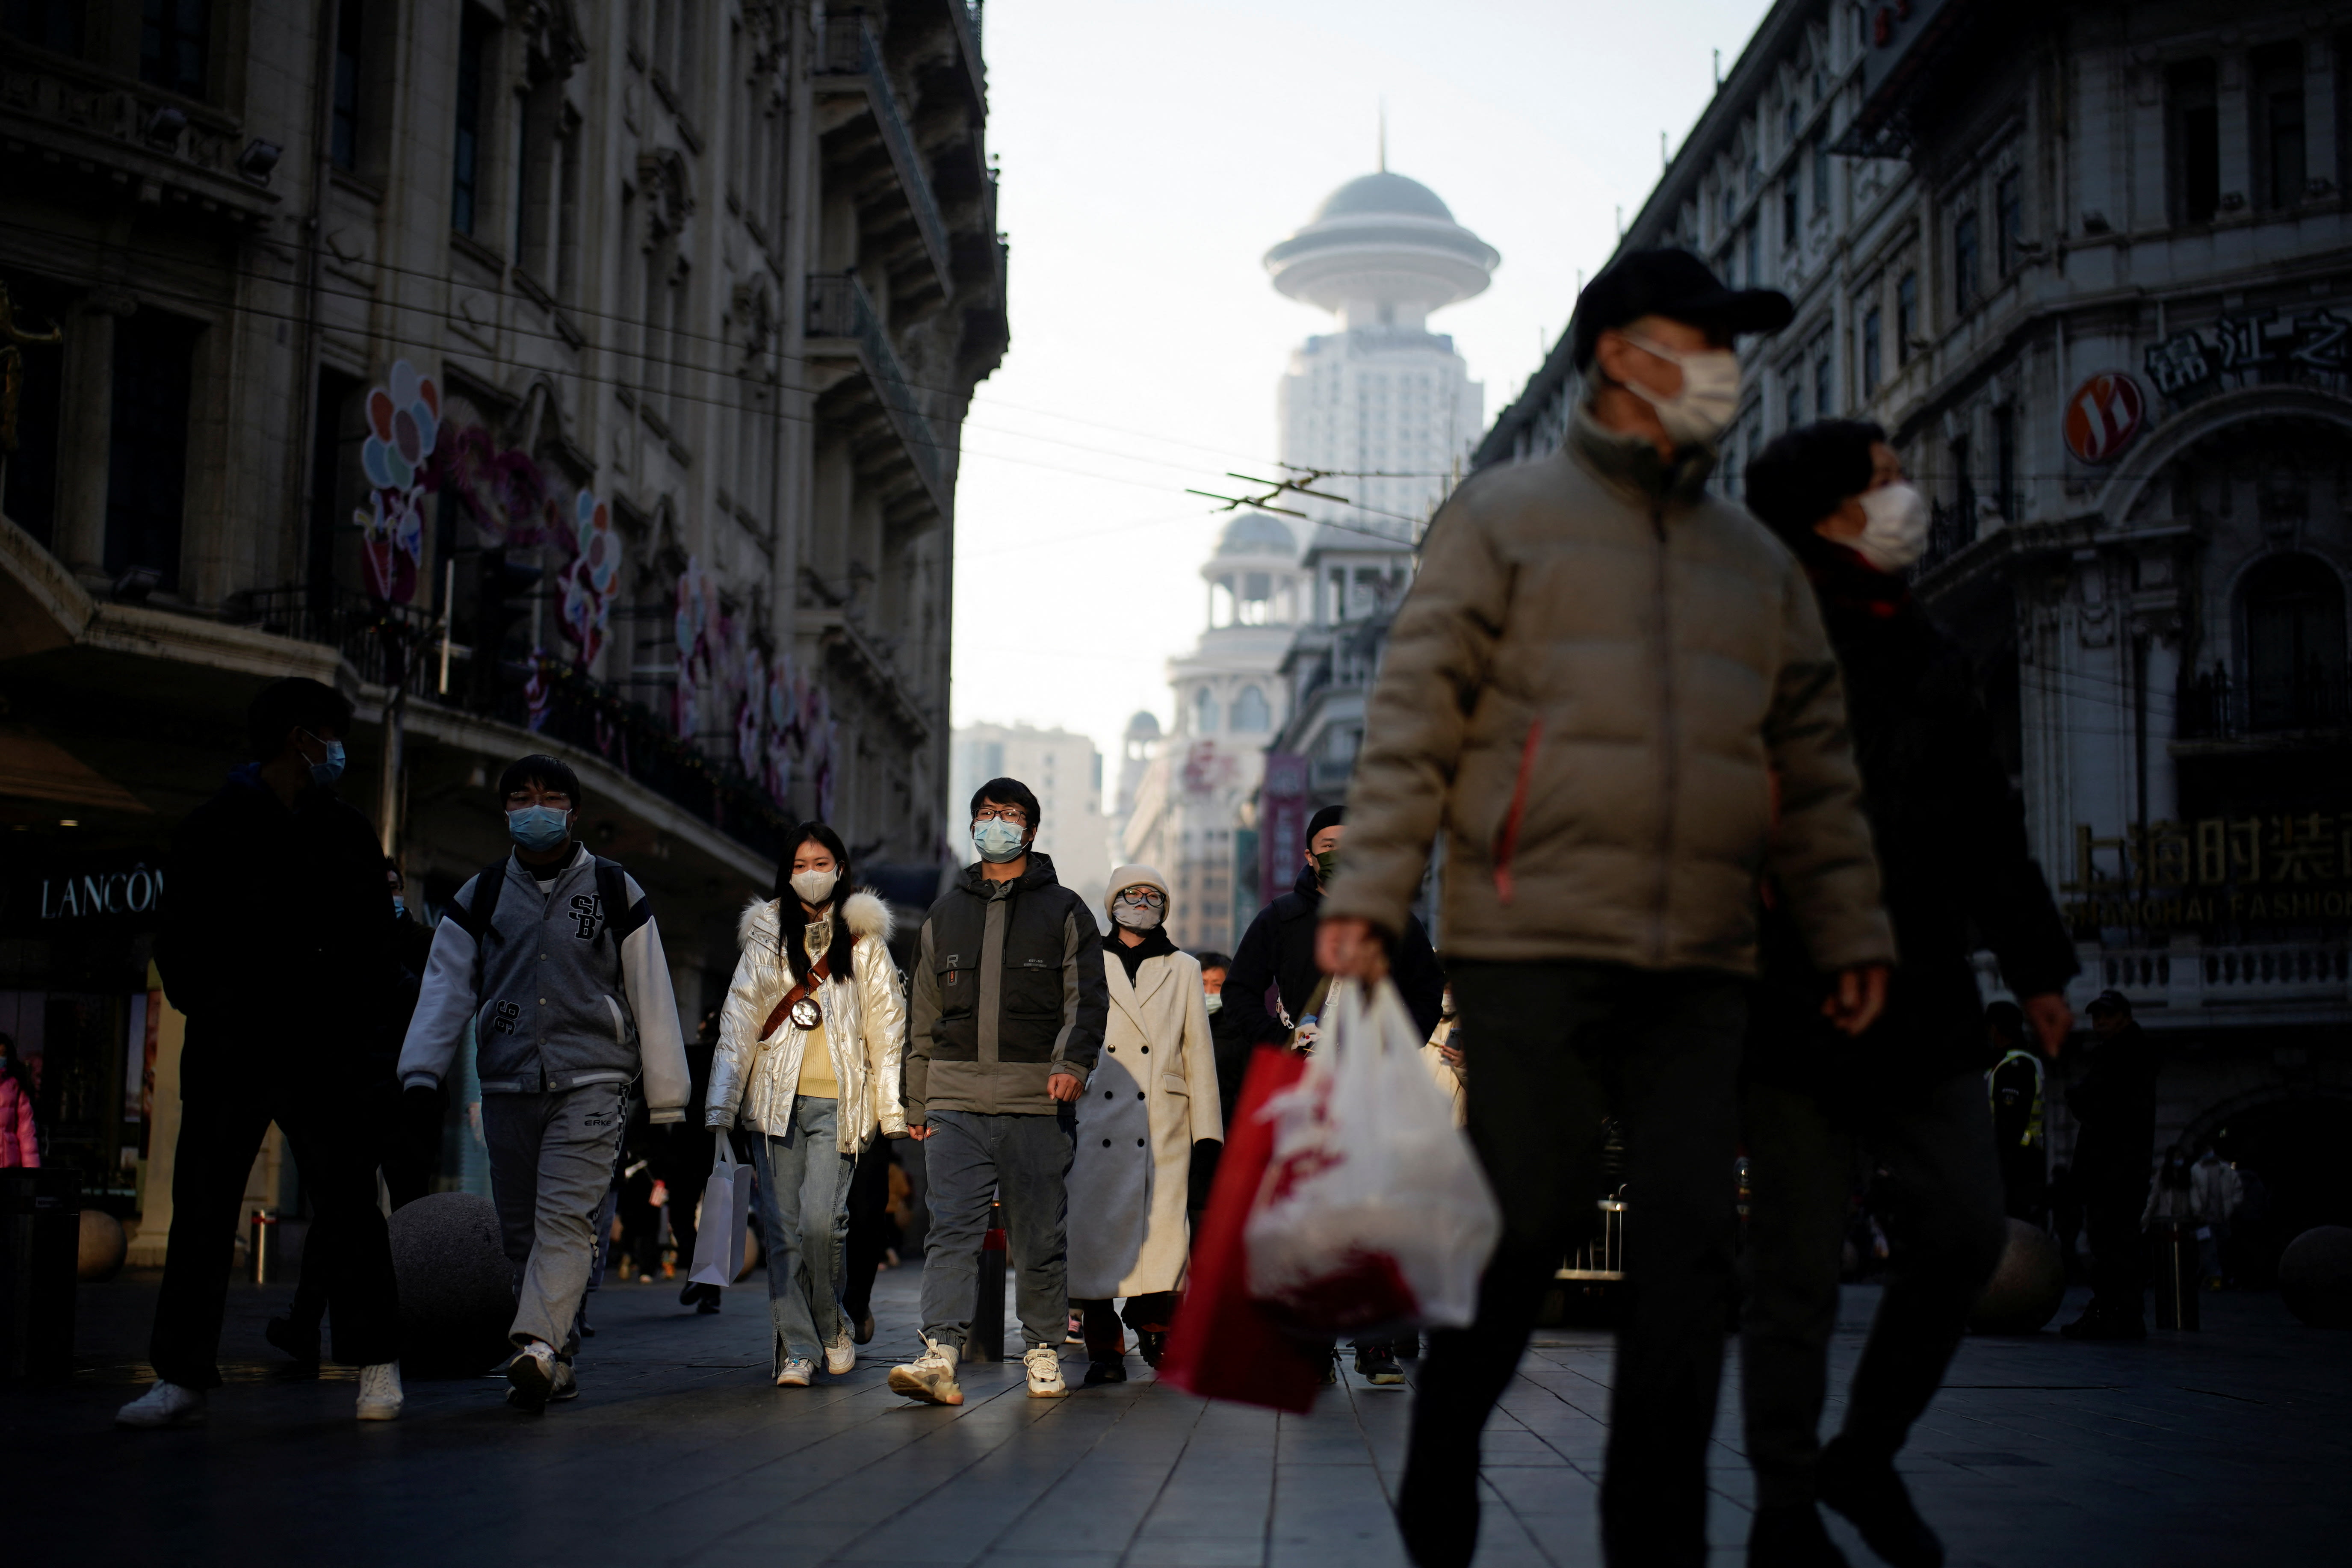 Shanghai cuts some tourism trips on Covid-19 cases; Chinese cities adding quarantine rooms